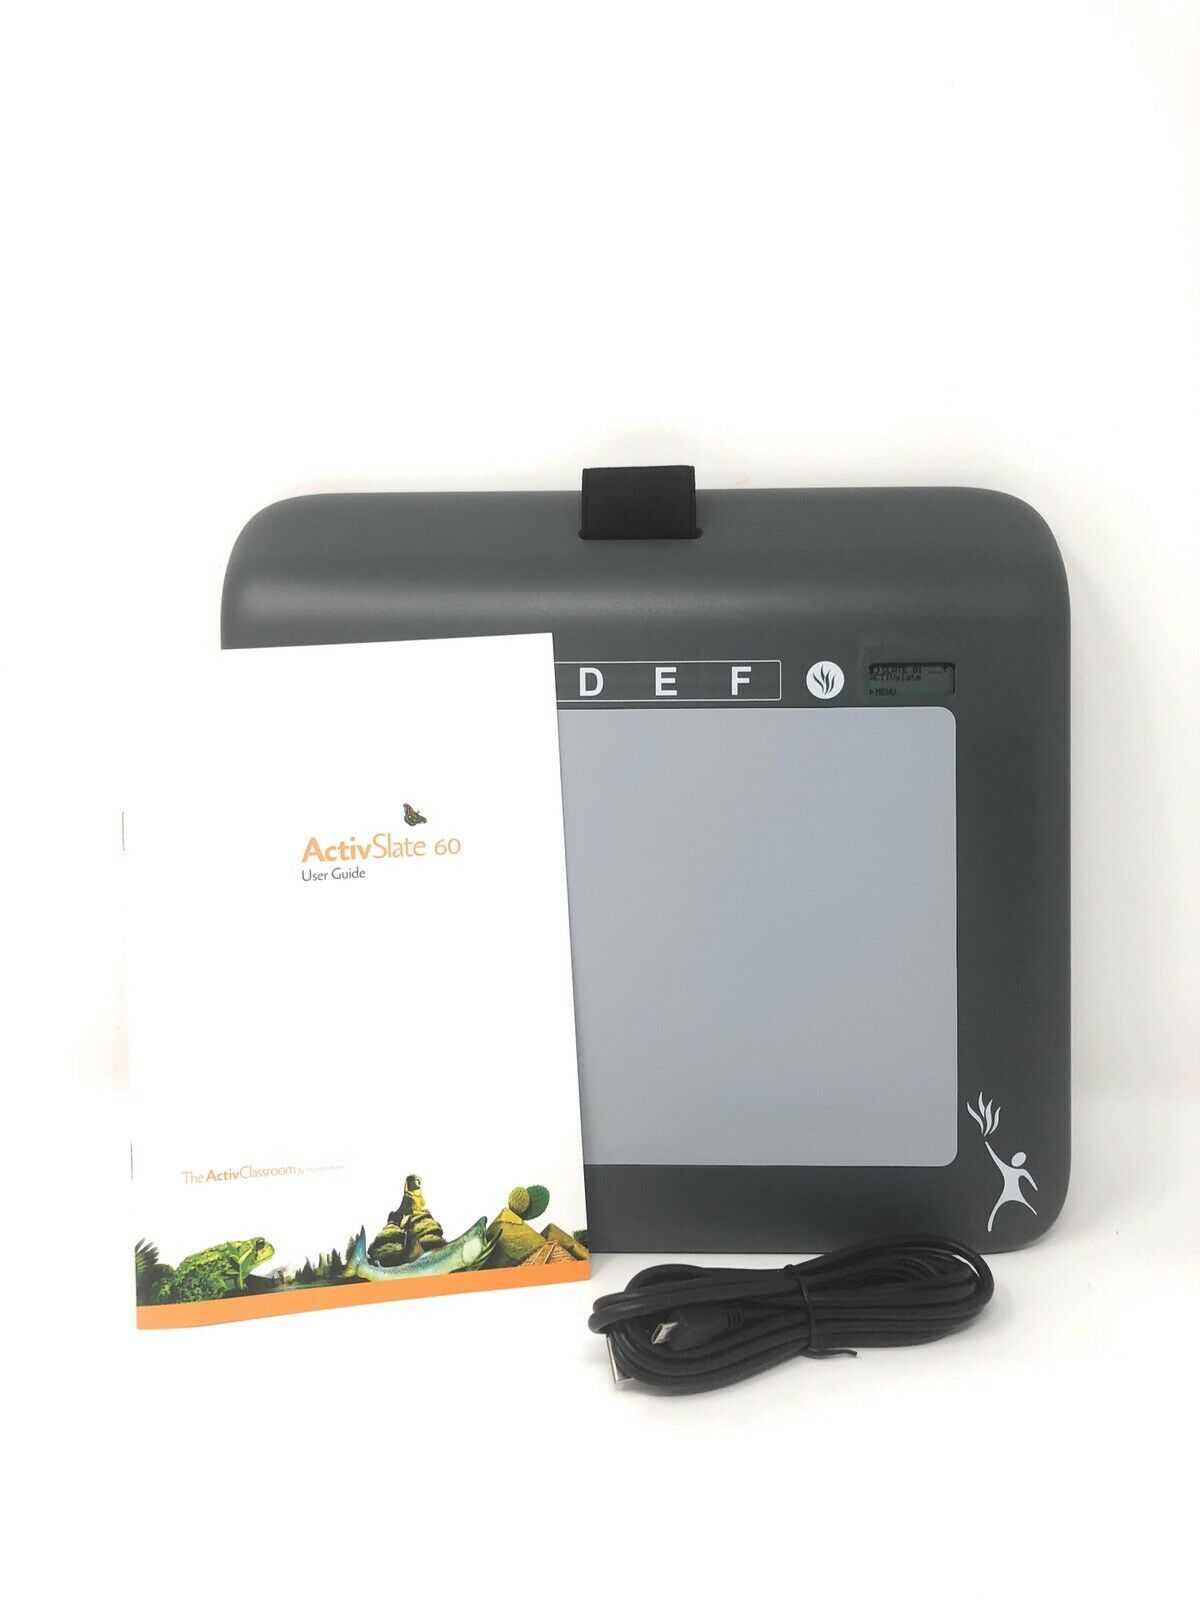 Promethean ActivSlate 60 PRM-RS3-01 With Pen And USB Cable 